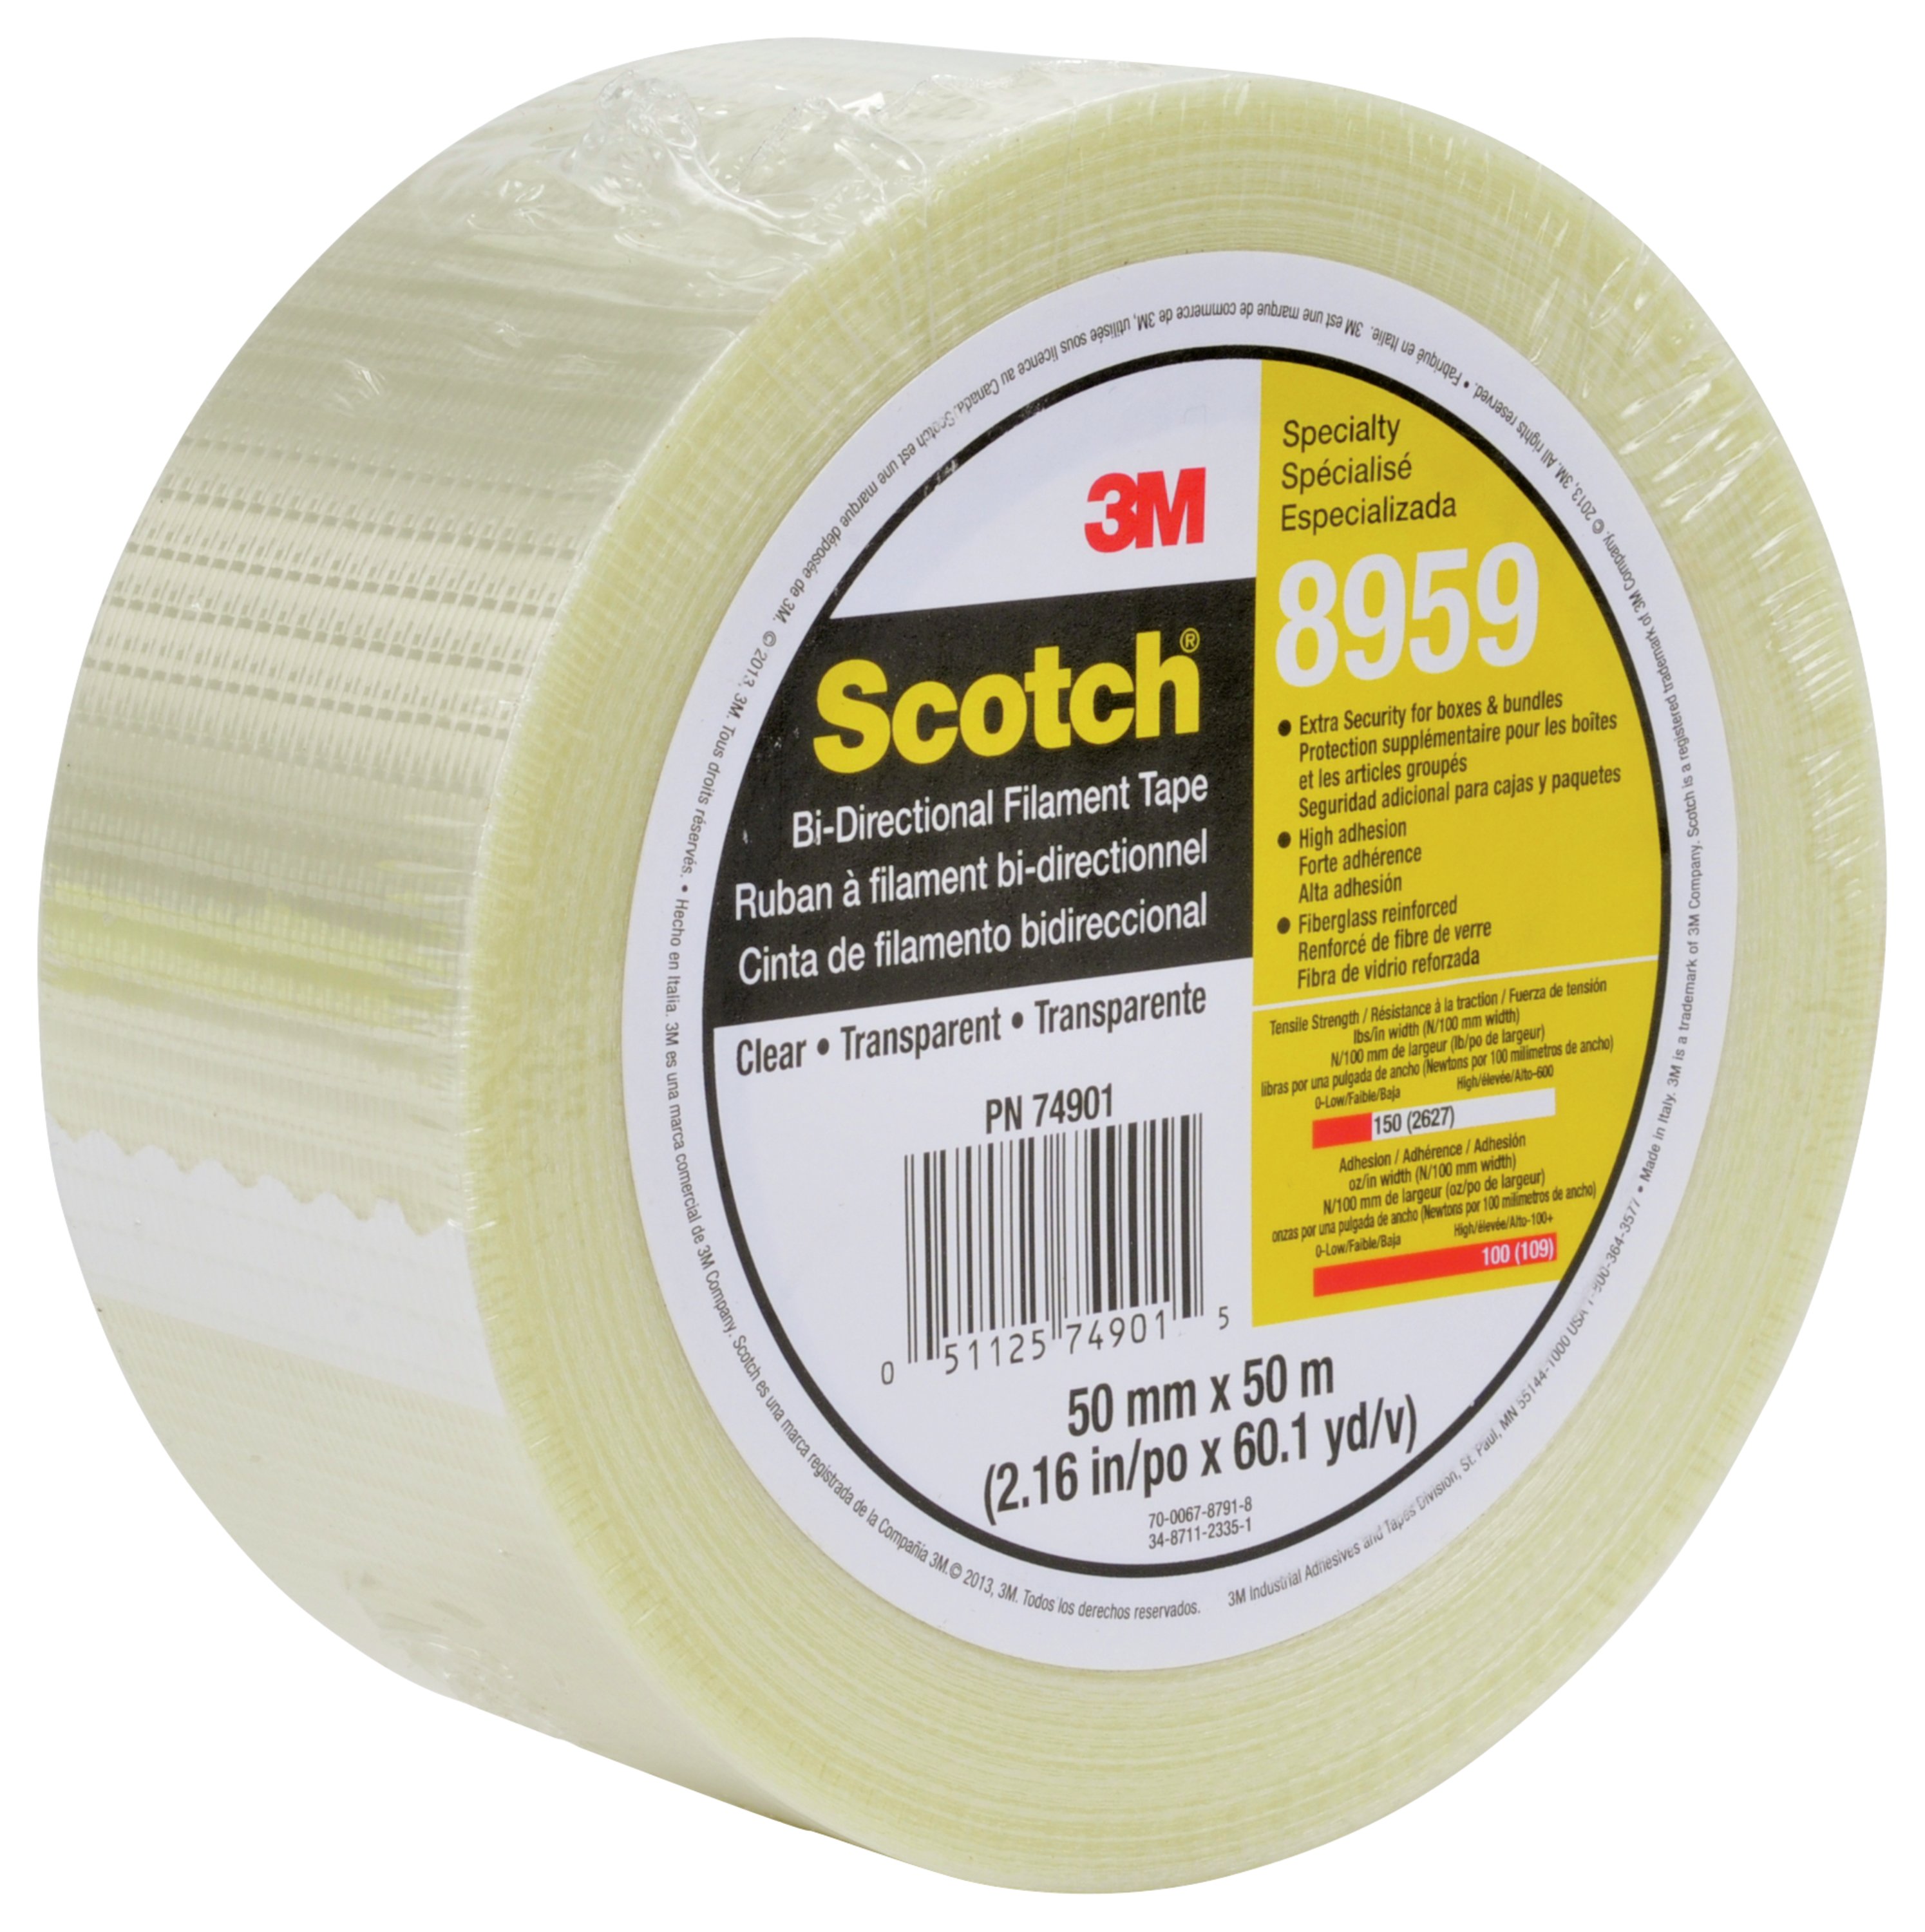 Scotch® Bi-Directional Filament Tape 8959 provides cut edge protection and resists abrasion and splitting. A synthetic rubber adhesive provides high initial adhesion and holds well with minimum rub-down on most surfaces. 